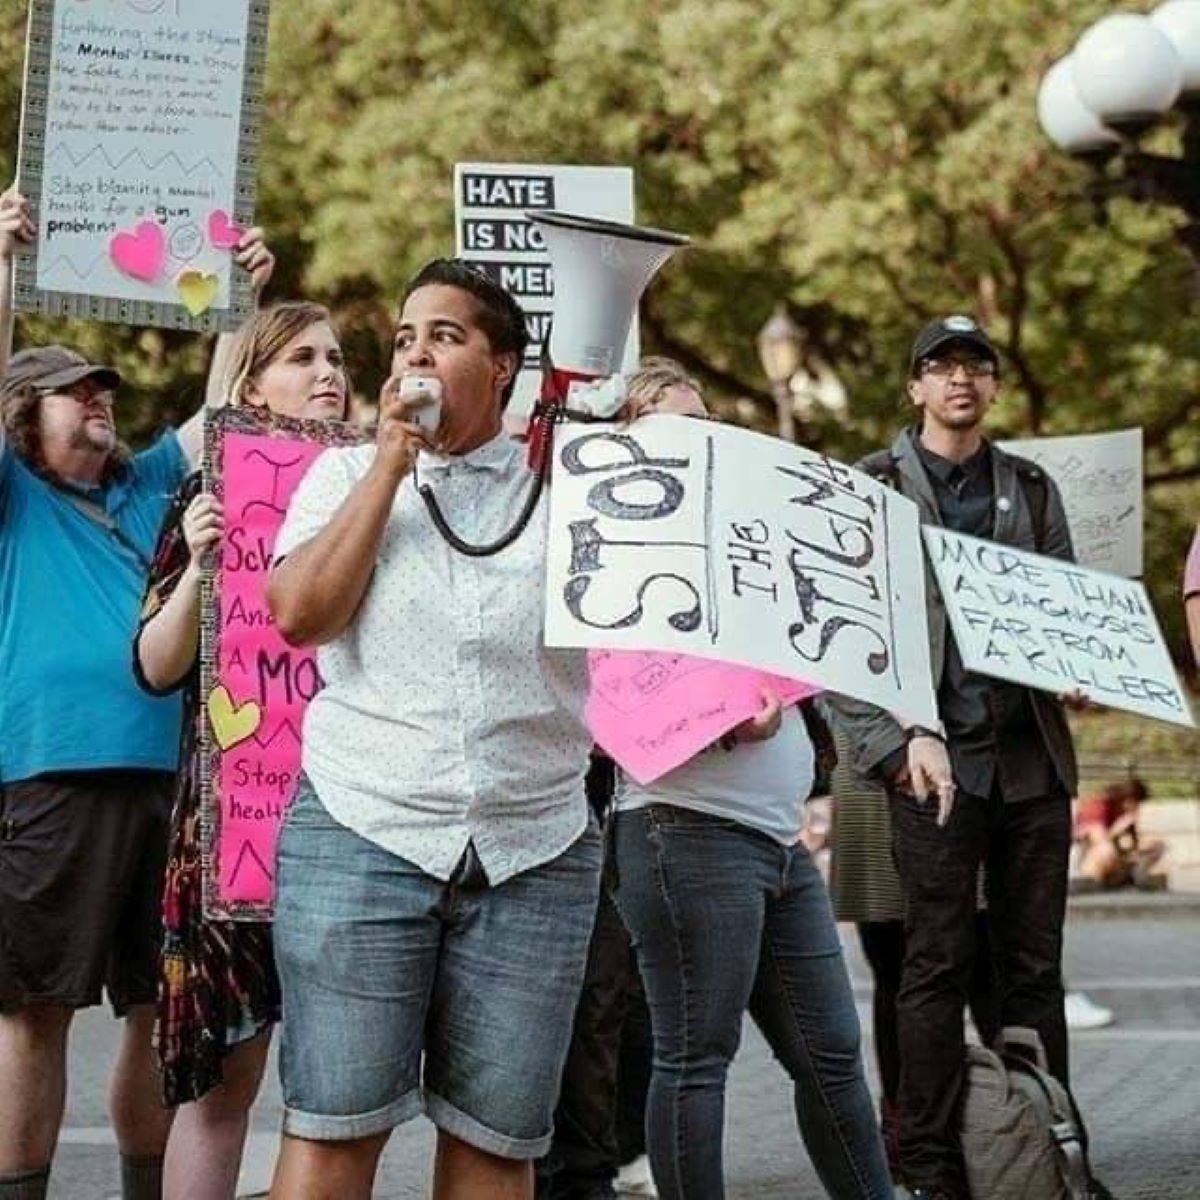 A brown, queer, non-binary person, outdoors, holds a megaphone. They are wearing a dressy white shirt and denim shorts. They have short black, spiky hair. Four people behind them hold signs, one reads Stop the stigma.